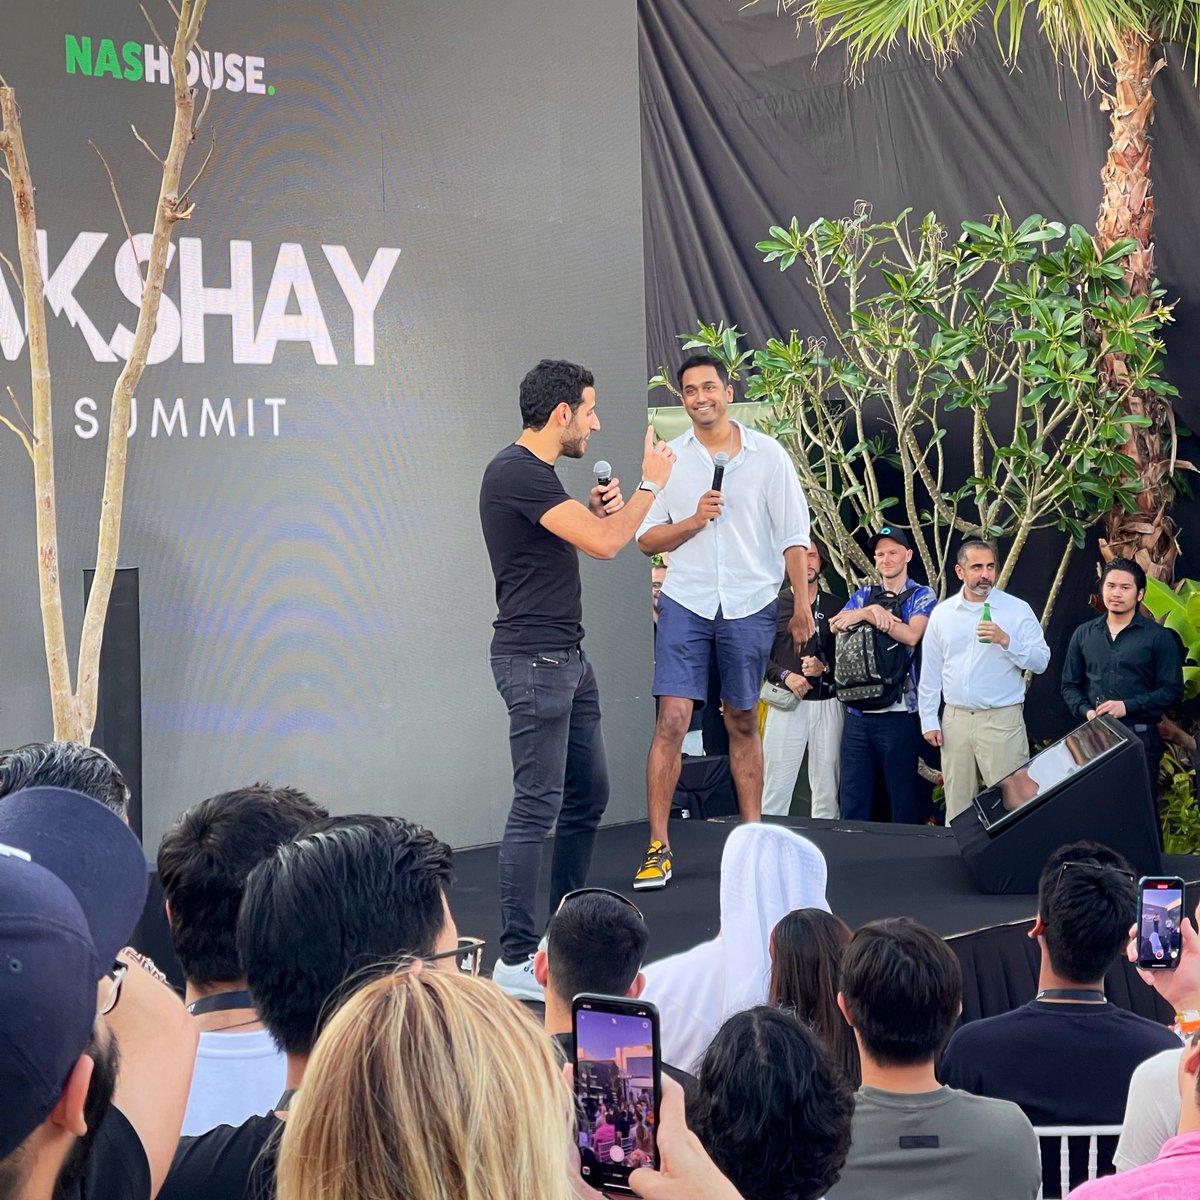 Akshay Summit was a lot of fun. Feeling blessed for the opportunity to enter exclusive circles. @nasdaily, @akshaybd, @balajis and @bryan_johnson gave a good show. Sad I missed @naval who I’ve heard was there too? One of my favorite humans. Good times.